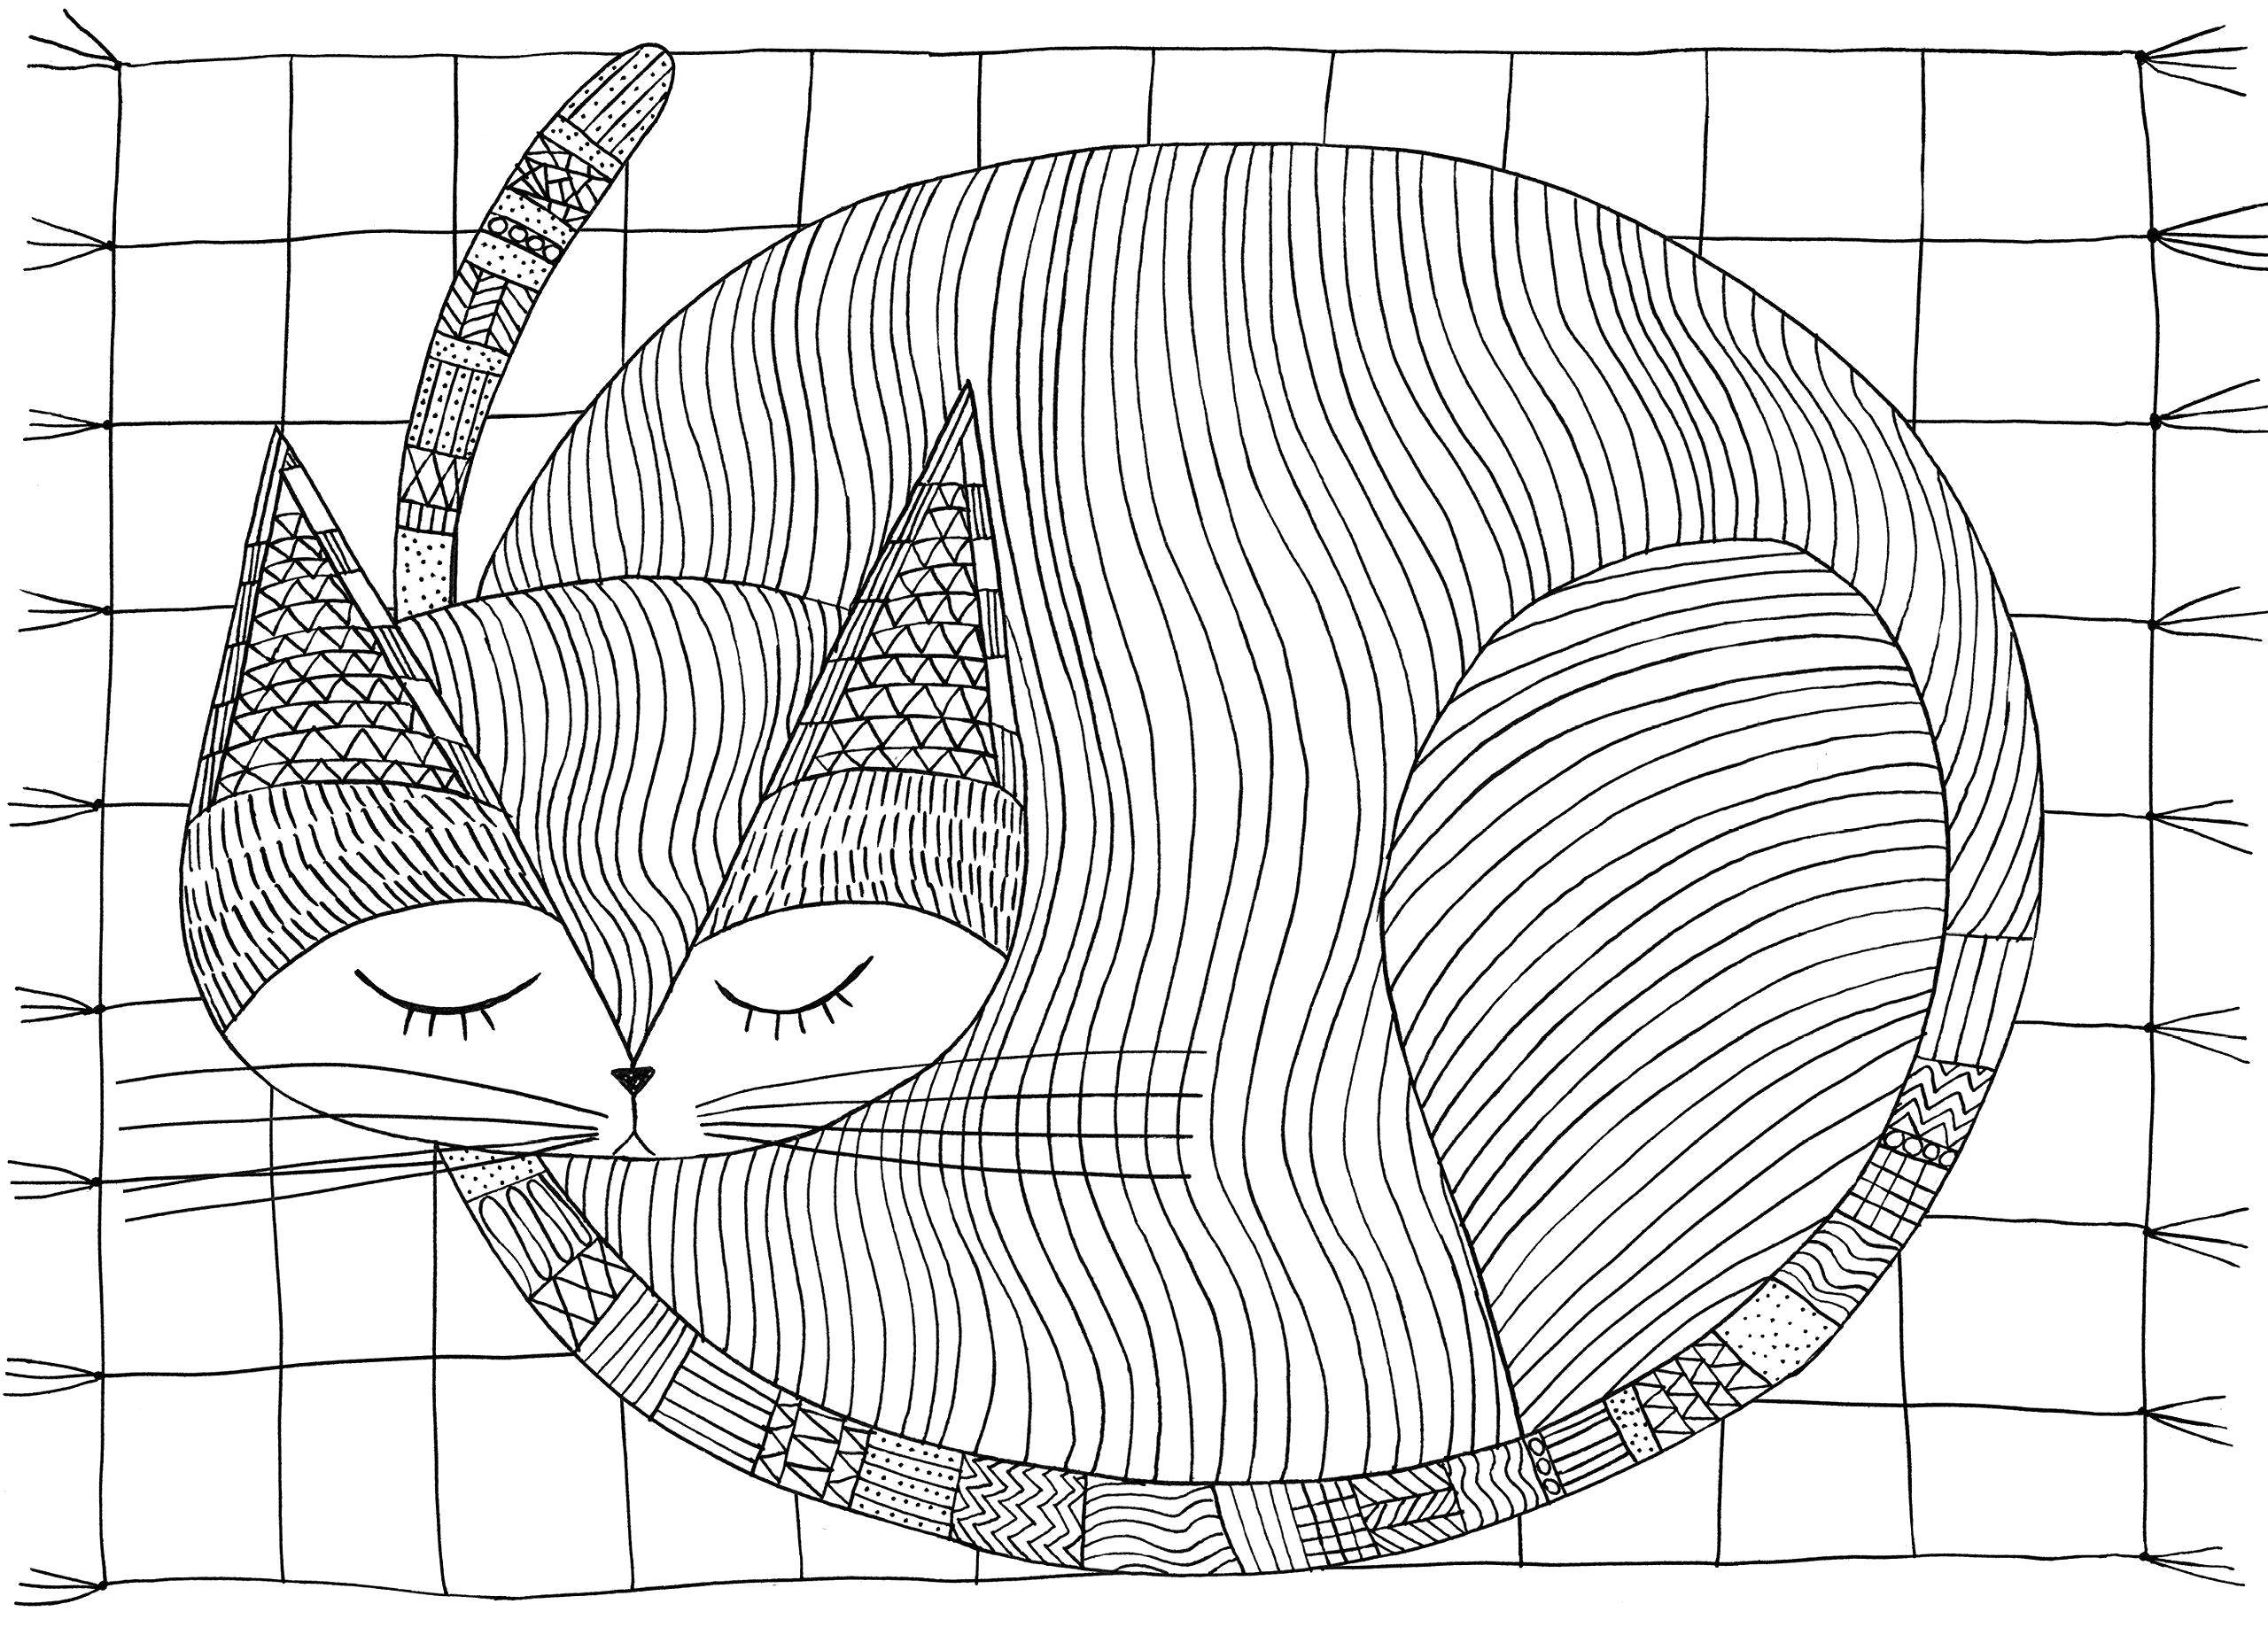 Coloring Cat from geometric patterns sleeping on the carpet. Category patterns. Tags:  Patterns, geometric, animals , cat.